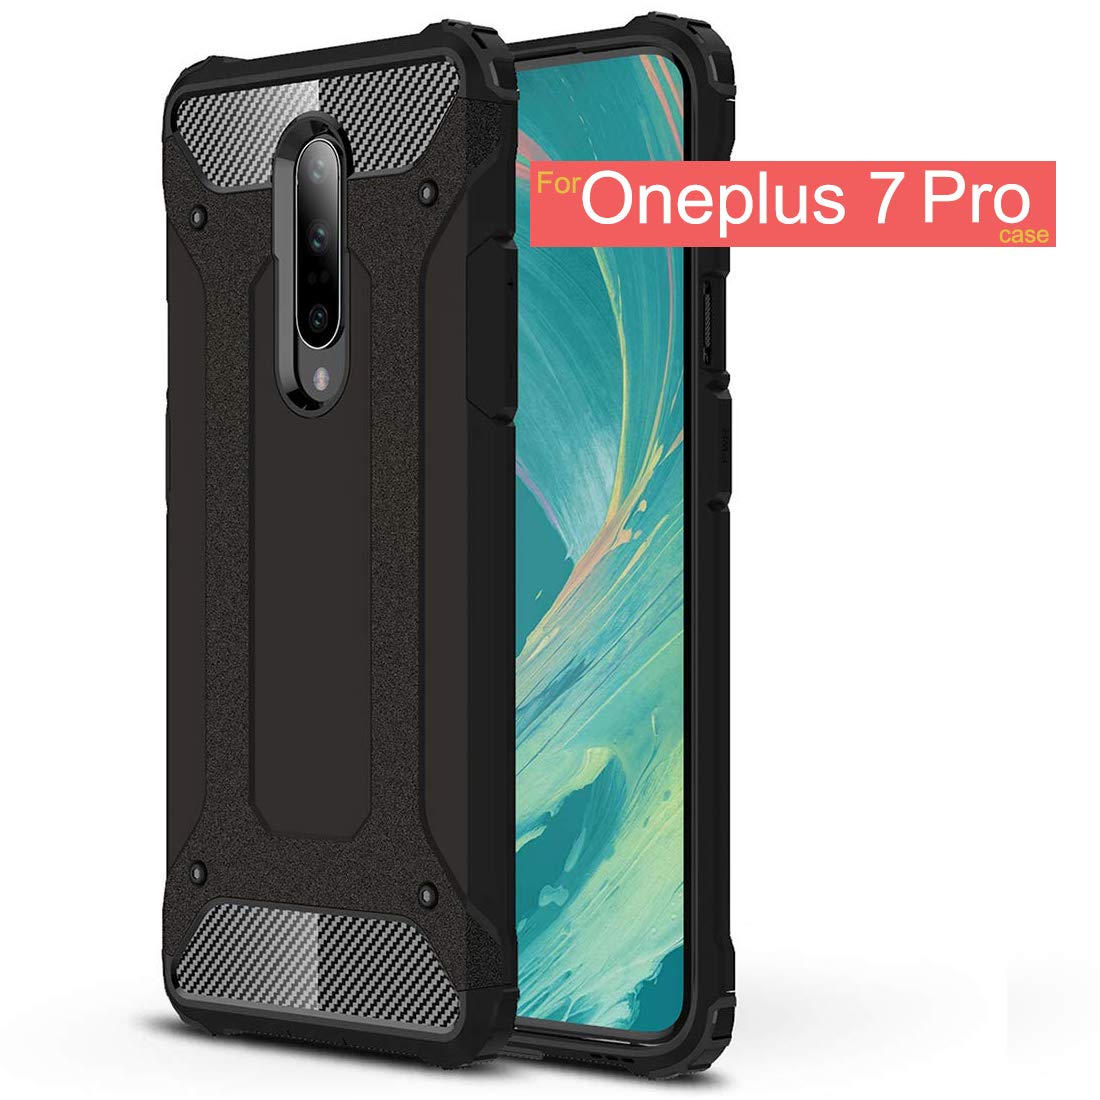 Osophter Dual Layer OnePlus 7 Pro Case Cover